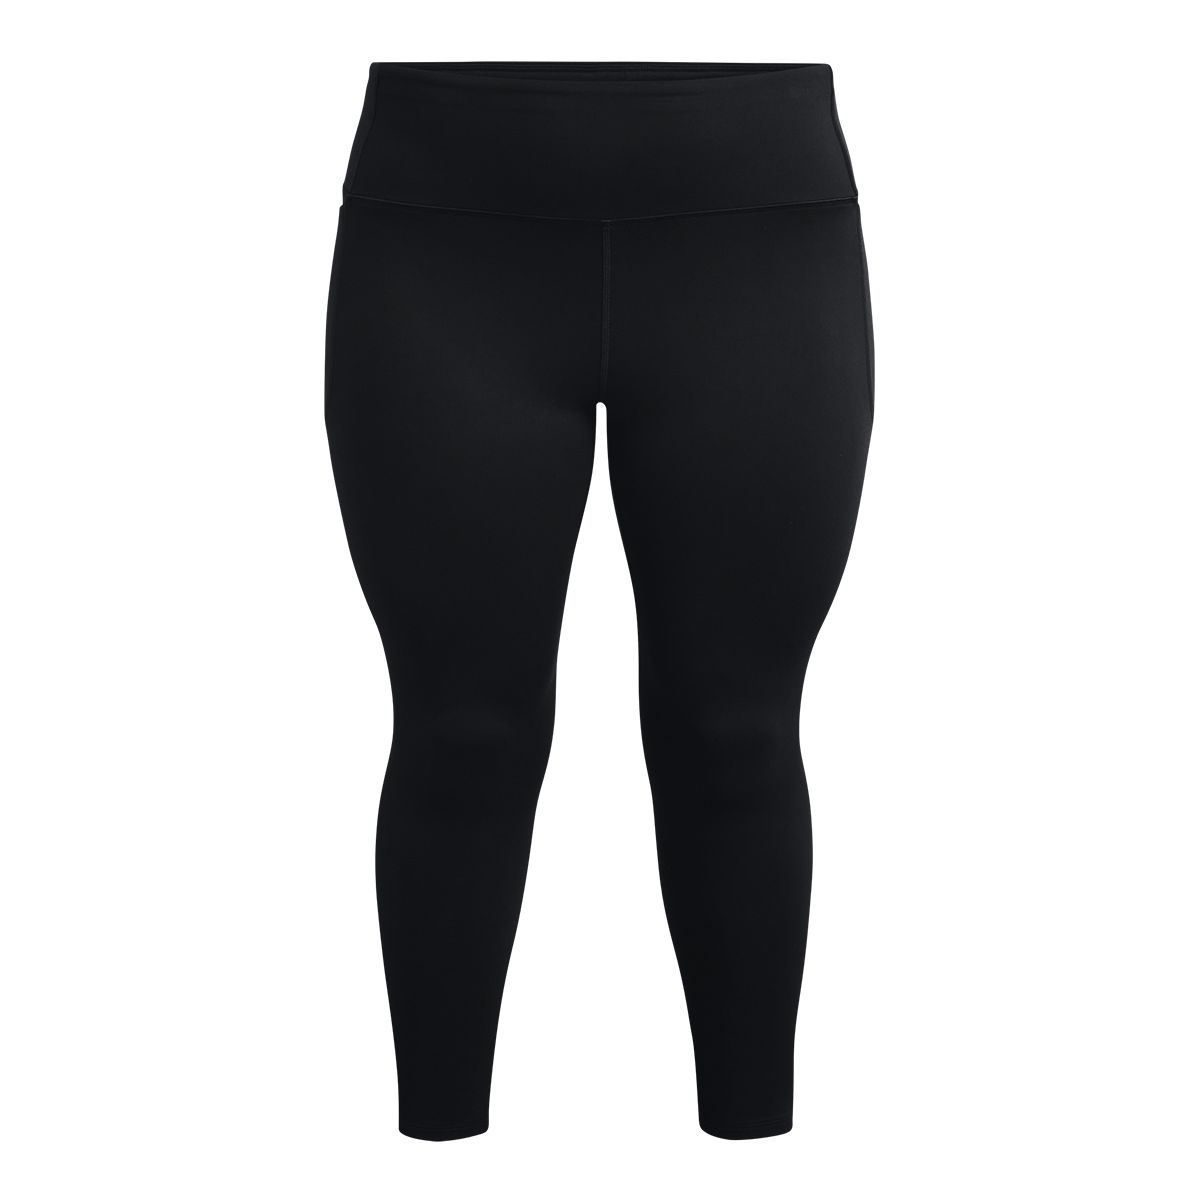 Under Armour Women's Plus Meridian Tights